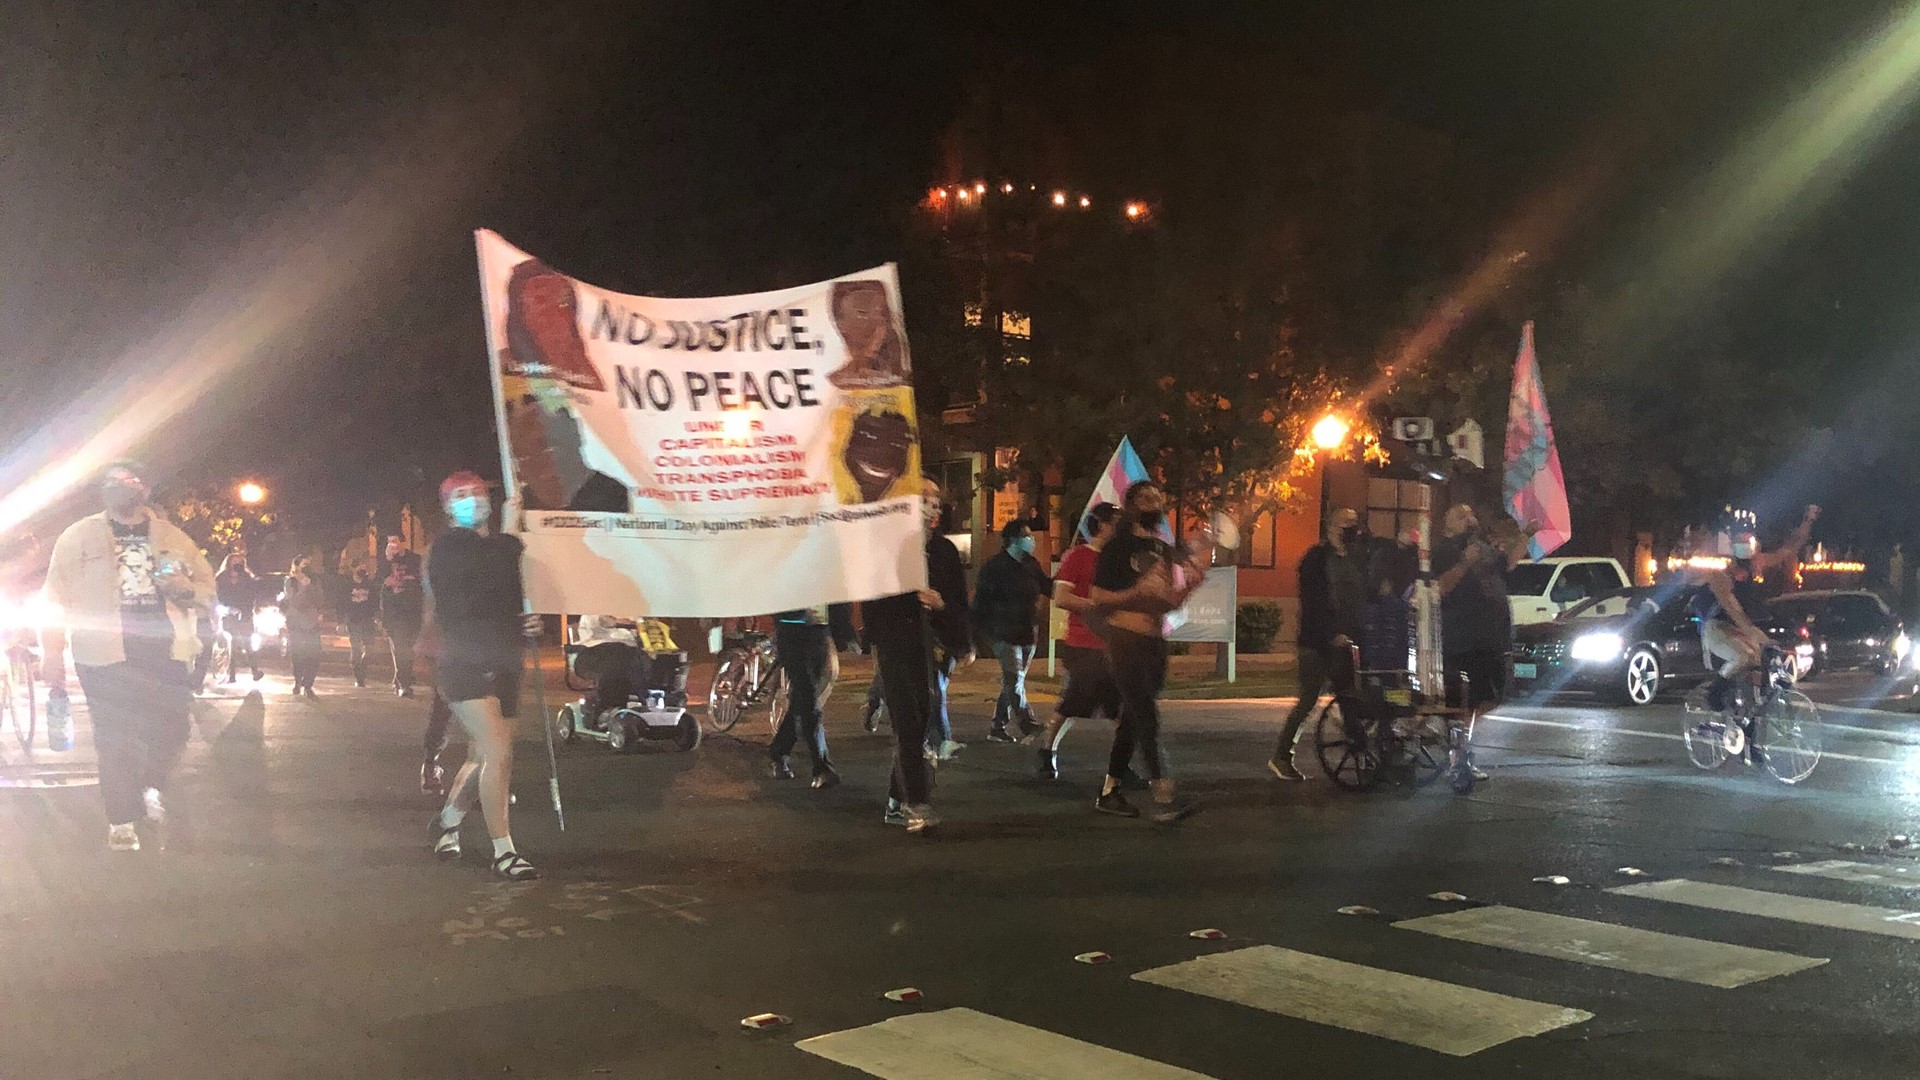 In downtown Sacramento on Thursday, several different groups with different styles of protest hosted demonstrations throughout the evening.